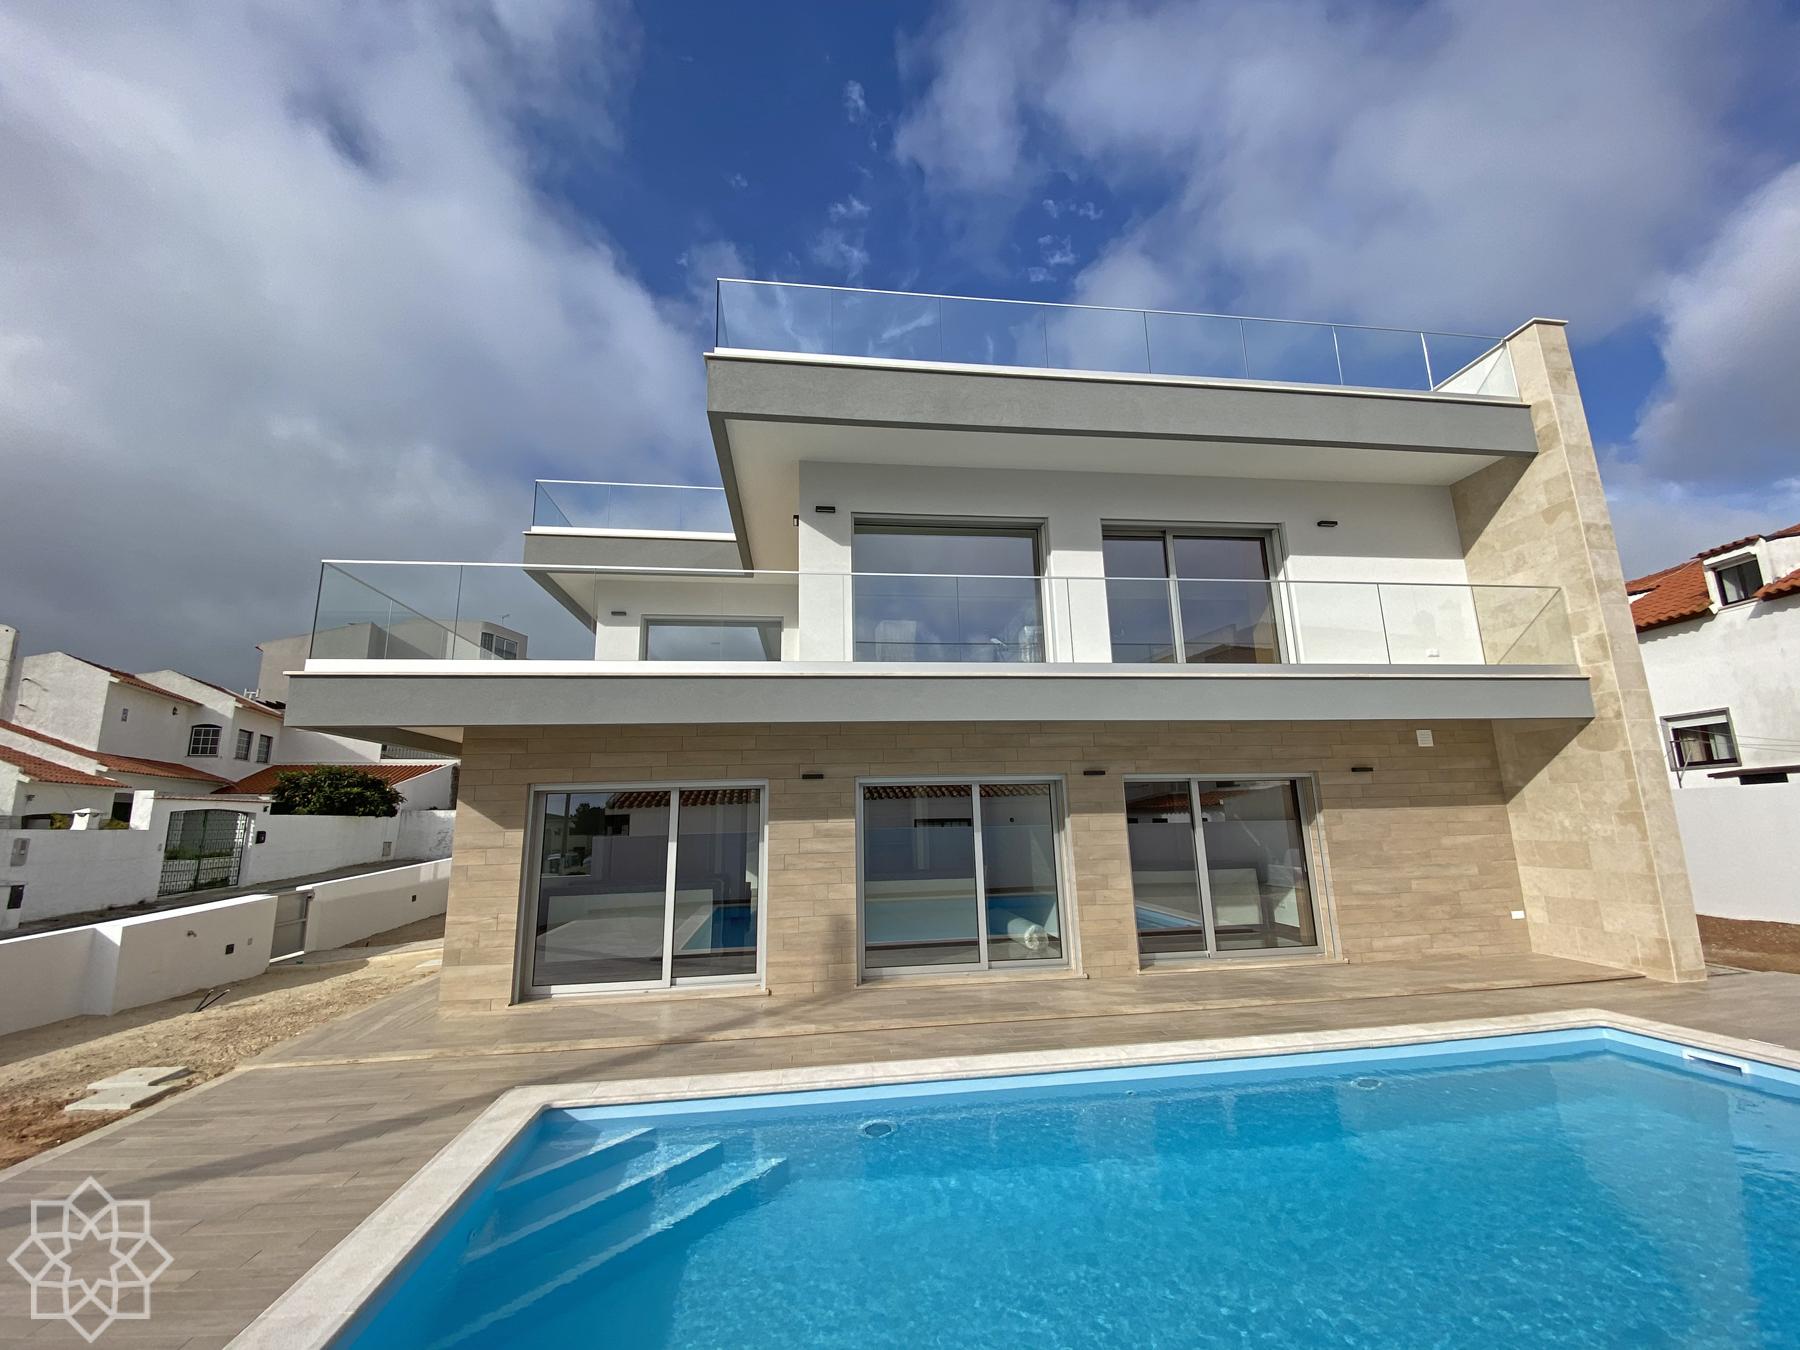 Finally time to move into the new house in Nazaré!